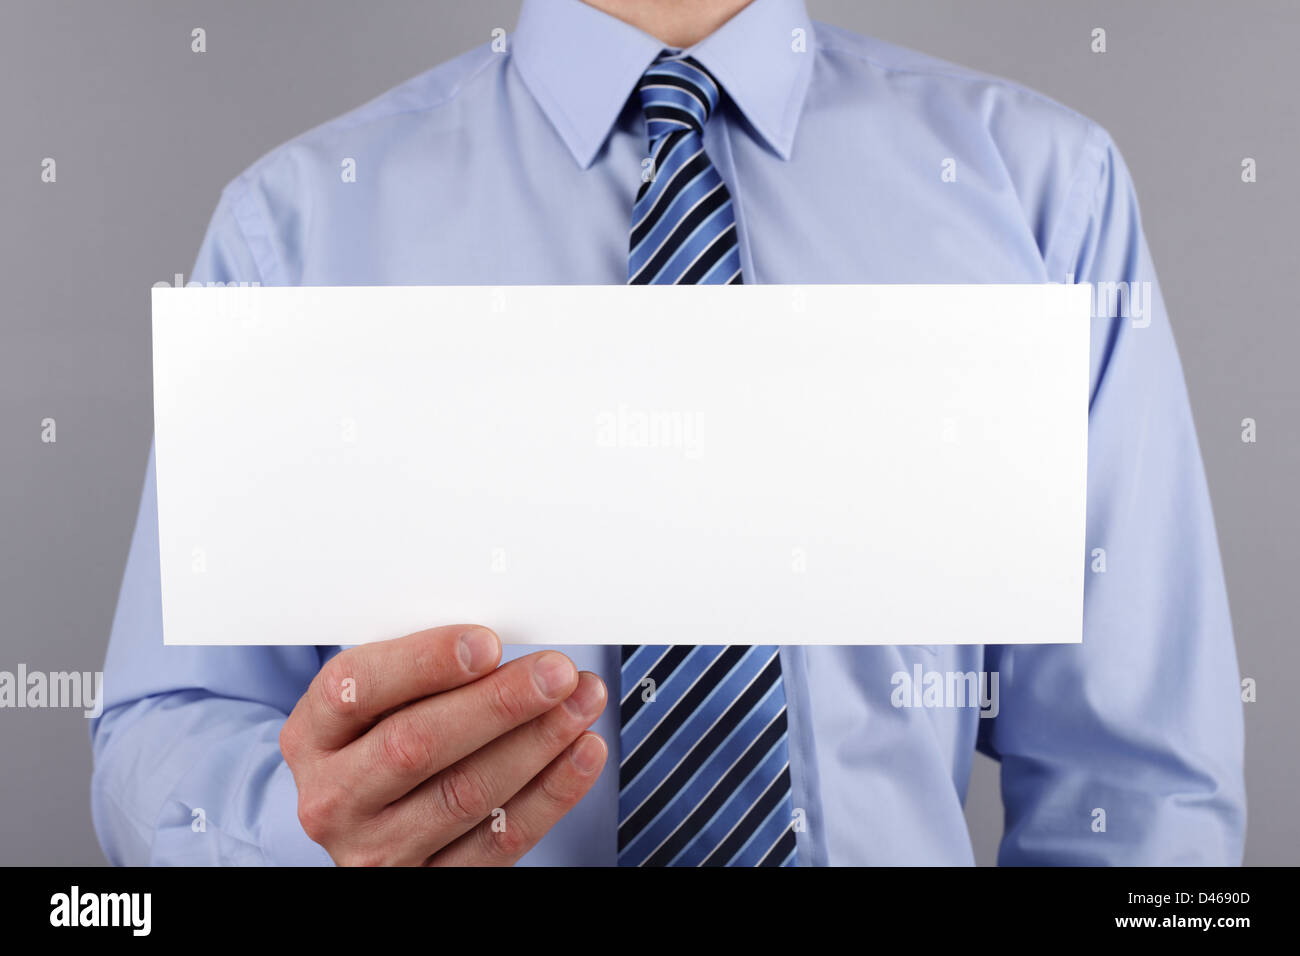 Blank sign for message Stock Photo